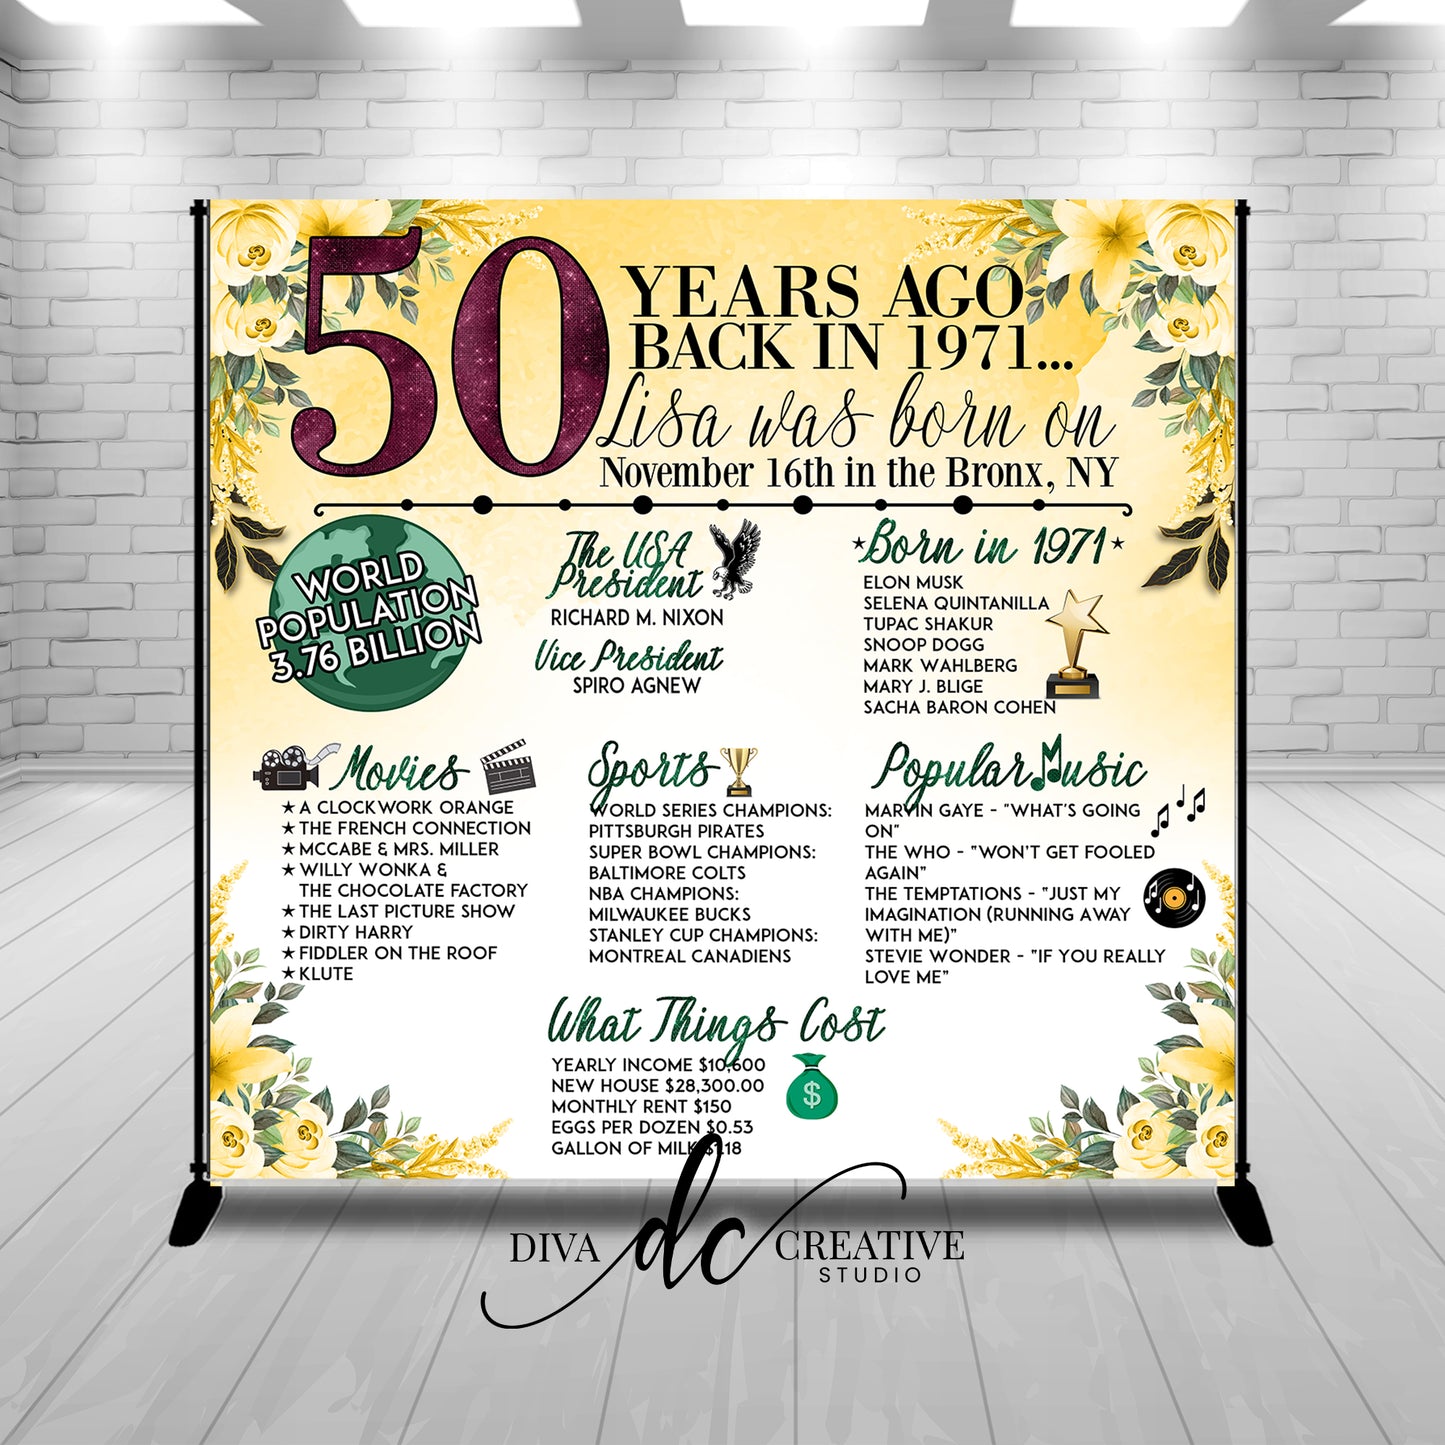 50 Years Ago Backdrop Print and Ship